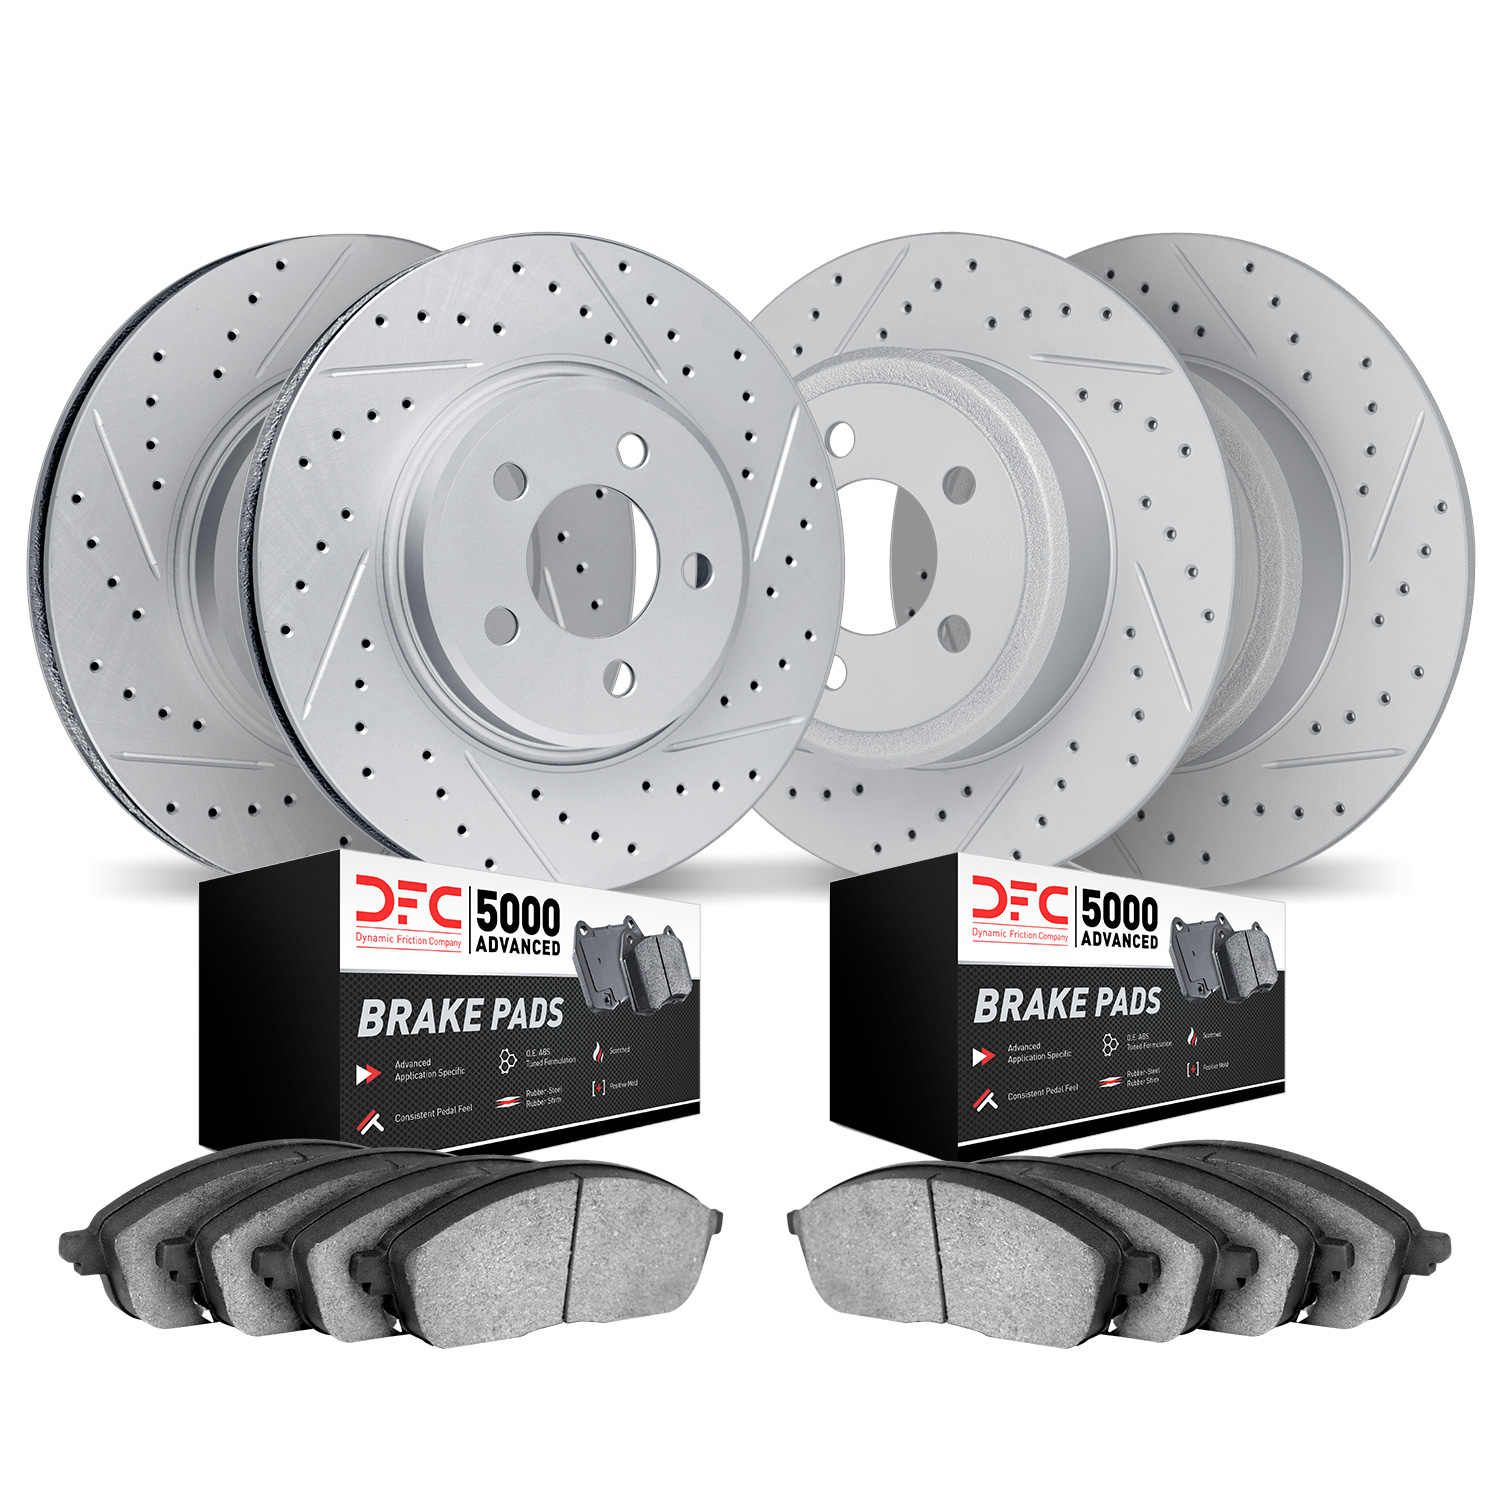 2504-54207 Geoperformance Drilled/Slotted Rotors w/5000 Advanced Brake Pads Kit, 2009-2010 Ford/Lincoln/Mercury/Mazda, Position: